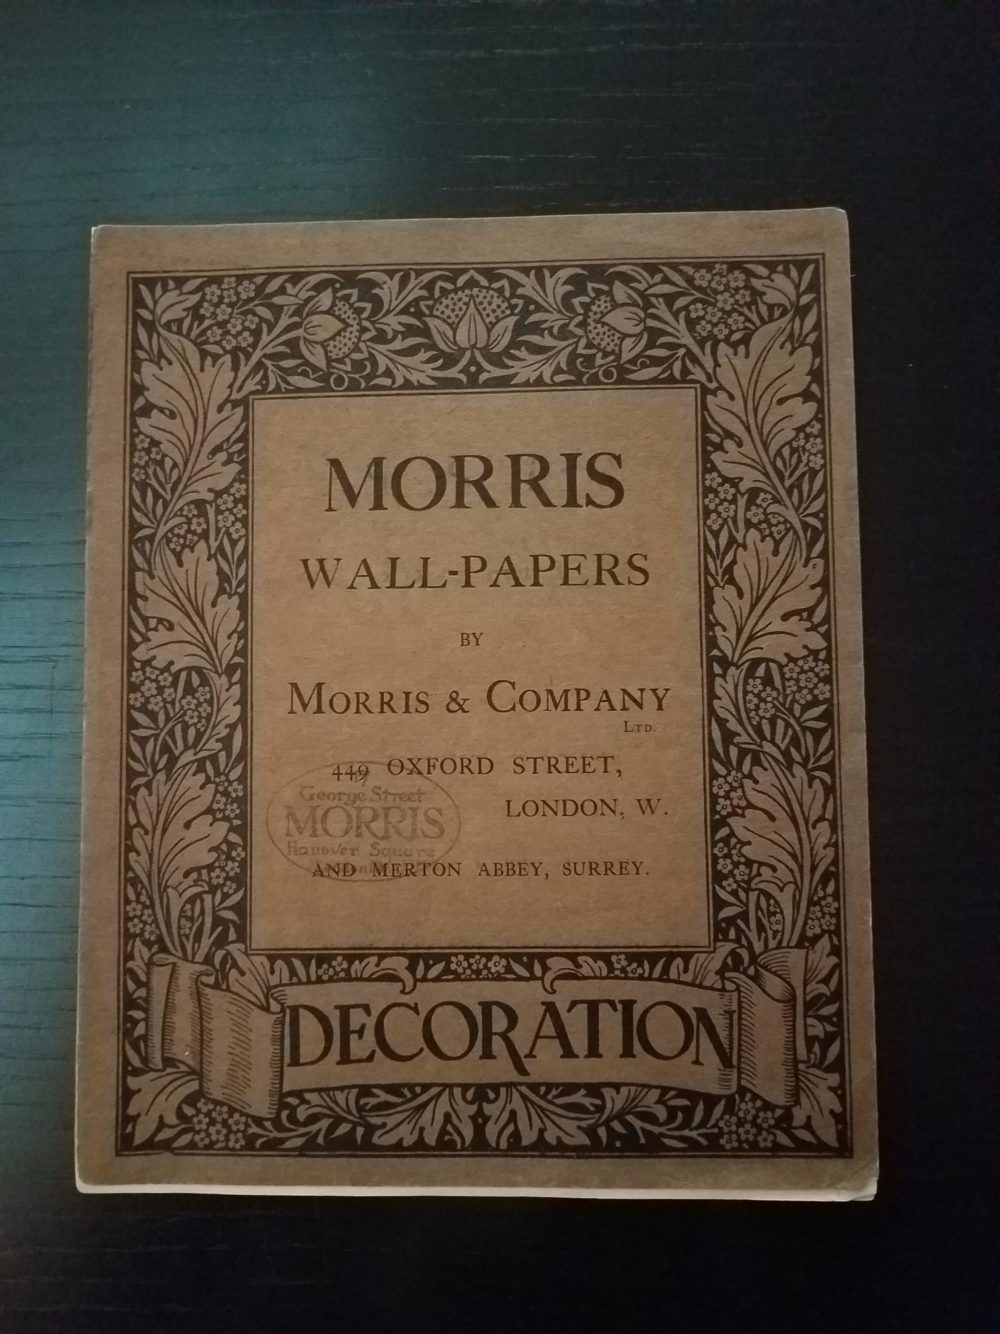 Image features front Cover of Morris wall-papers by Morris & Company. Please scroll down to read the blog post about this object